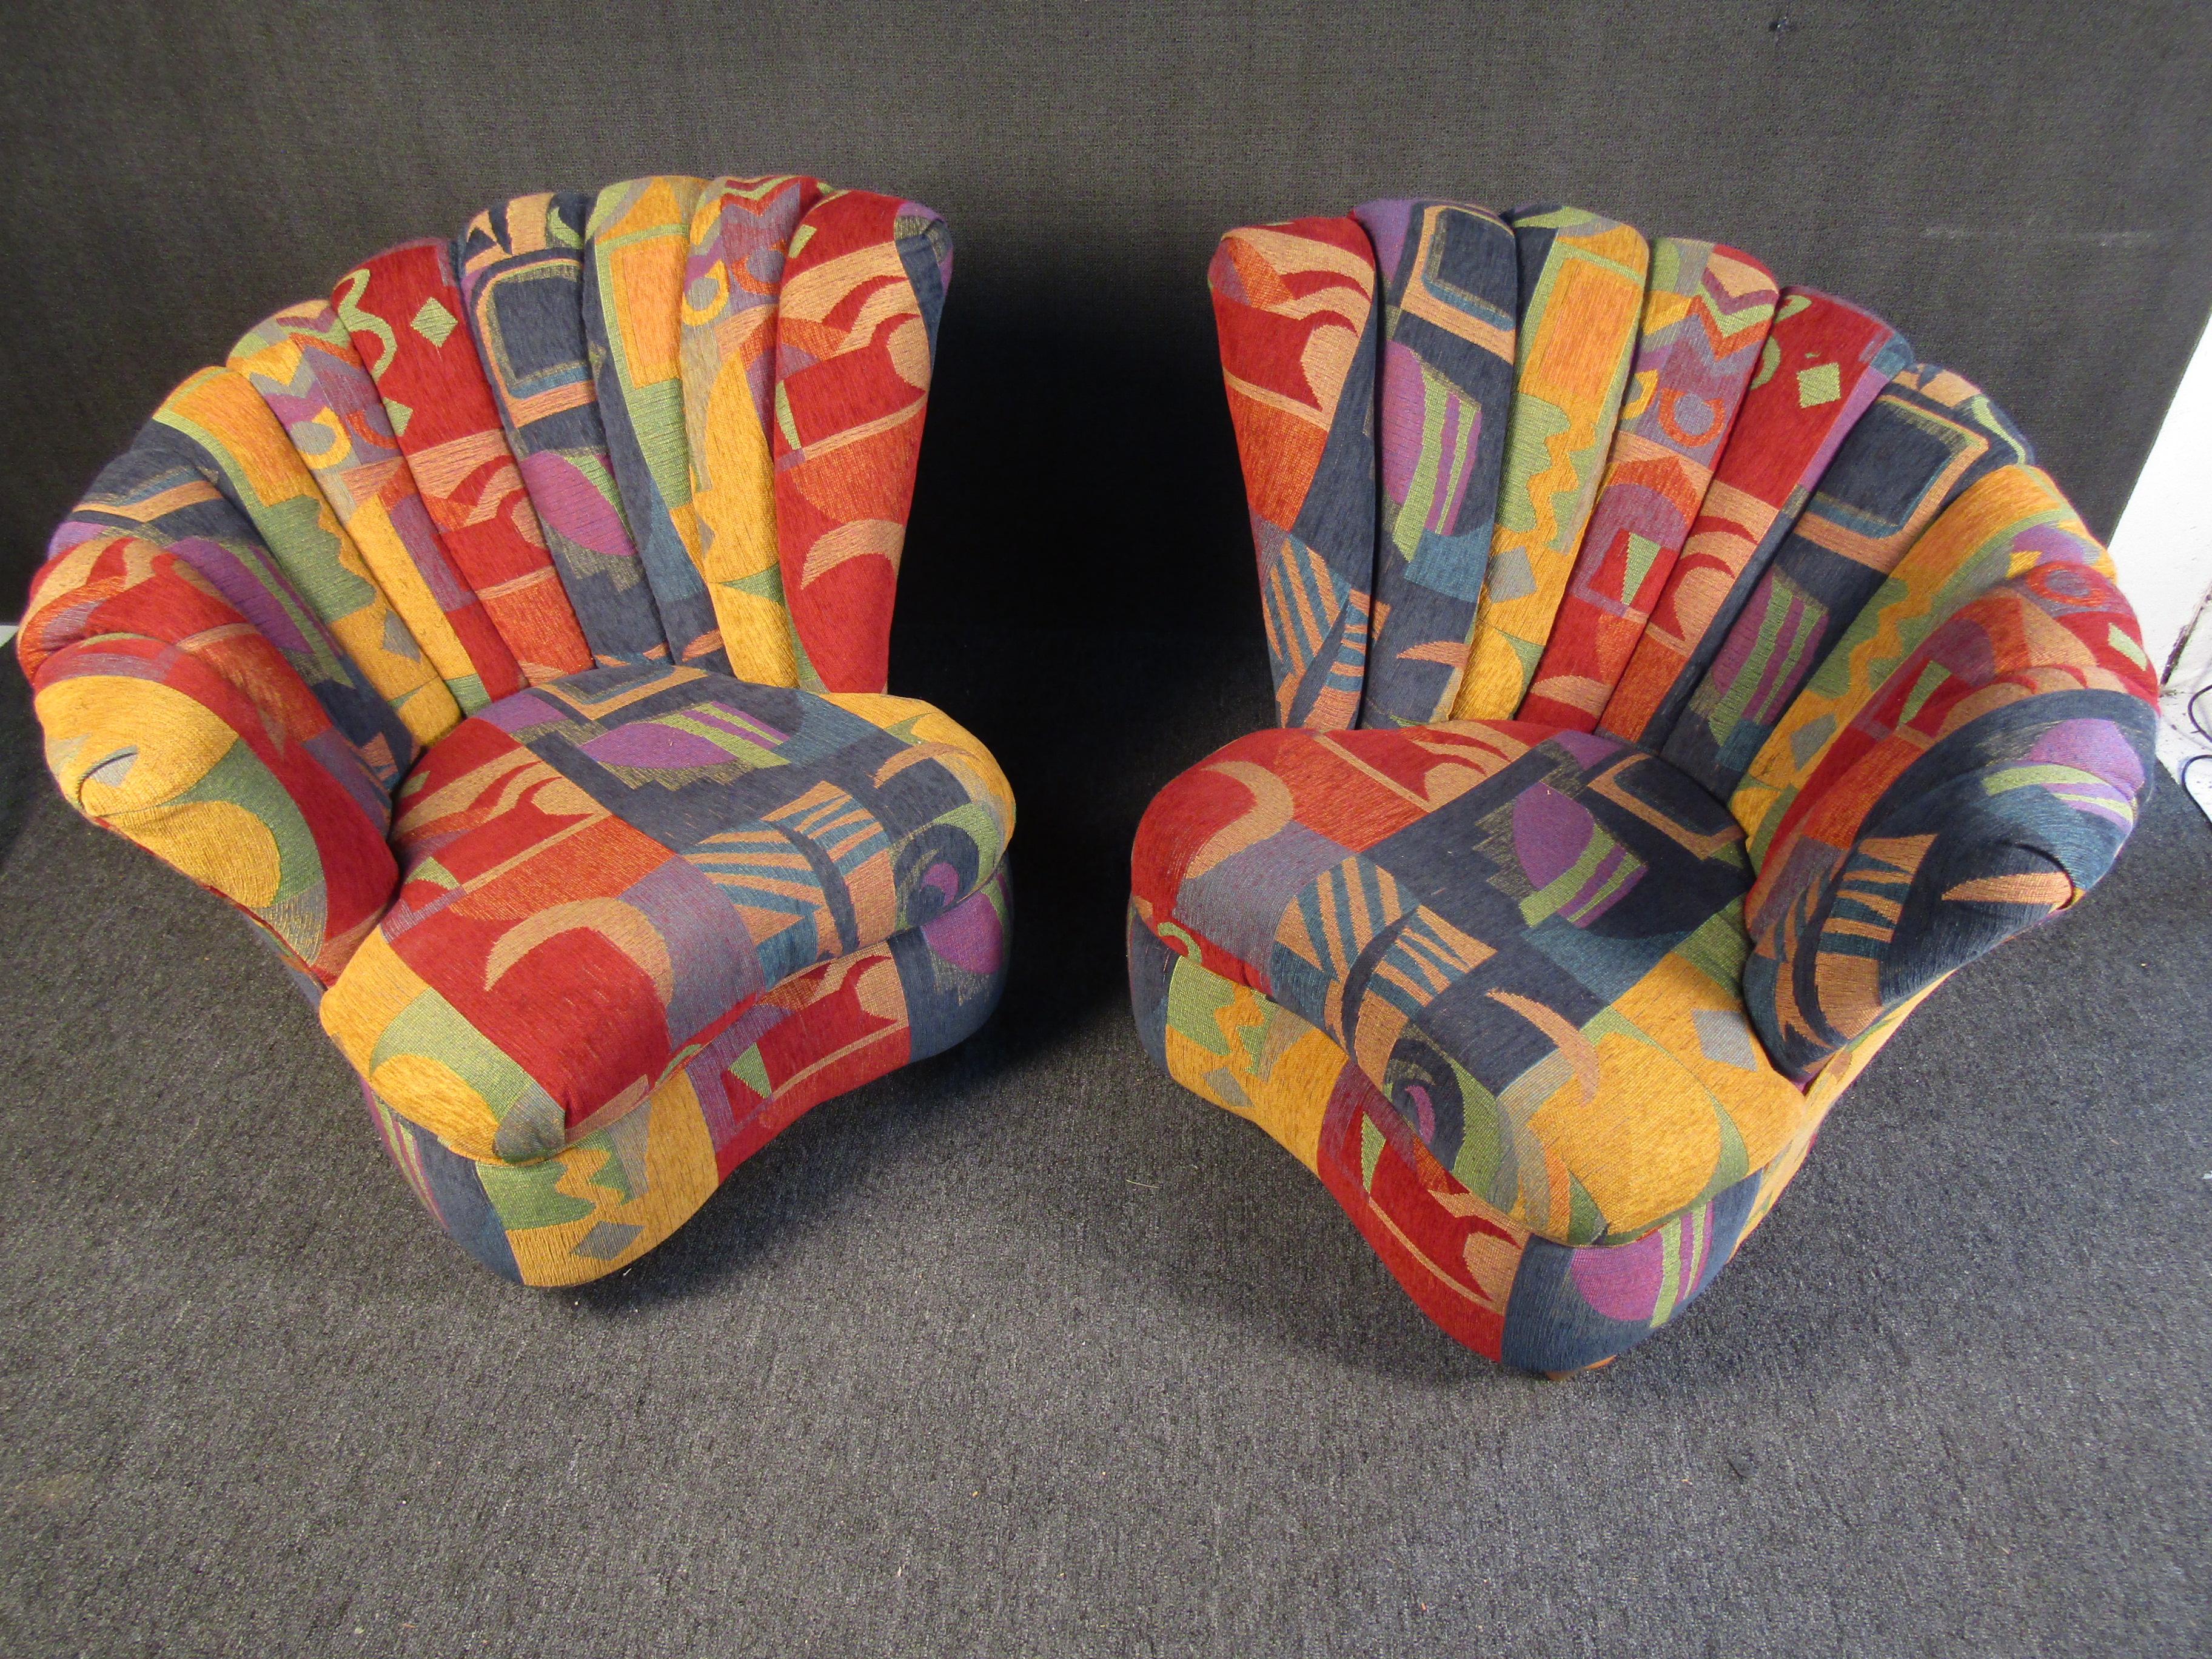 A quirky pair of club chairs that are sure to pop in any space with their playful color and patterning. An interesting Mid-Century Modern design offers comfortable seating while brightening up any space. Please confirm item location with seller